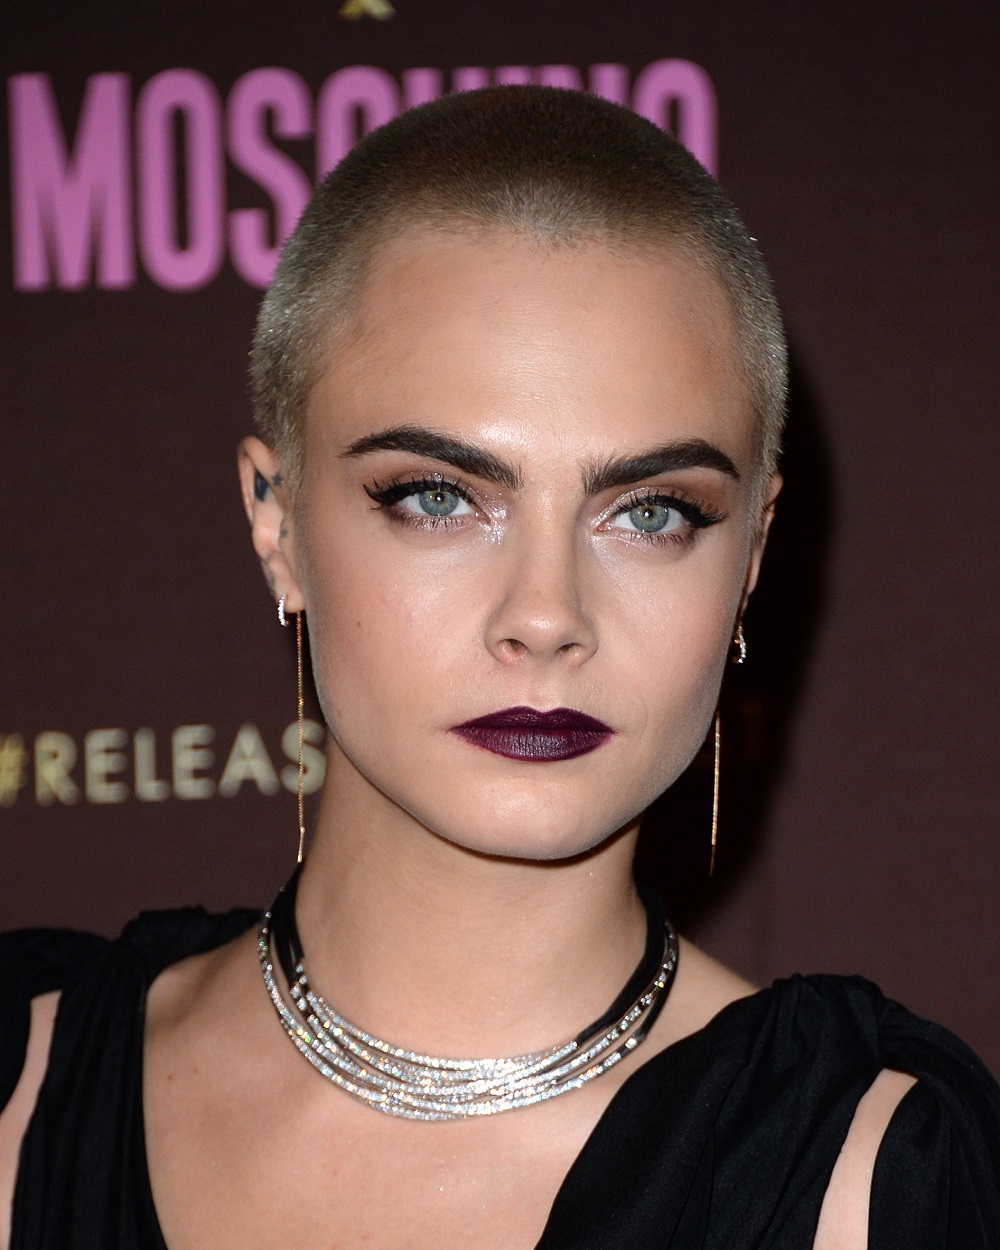 Cara Delevingne at the Magnum party - The 70th Annual Cannes Film Festival